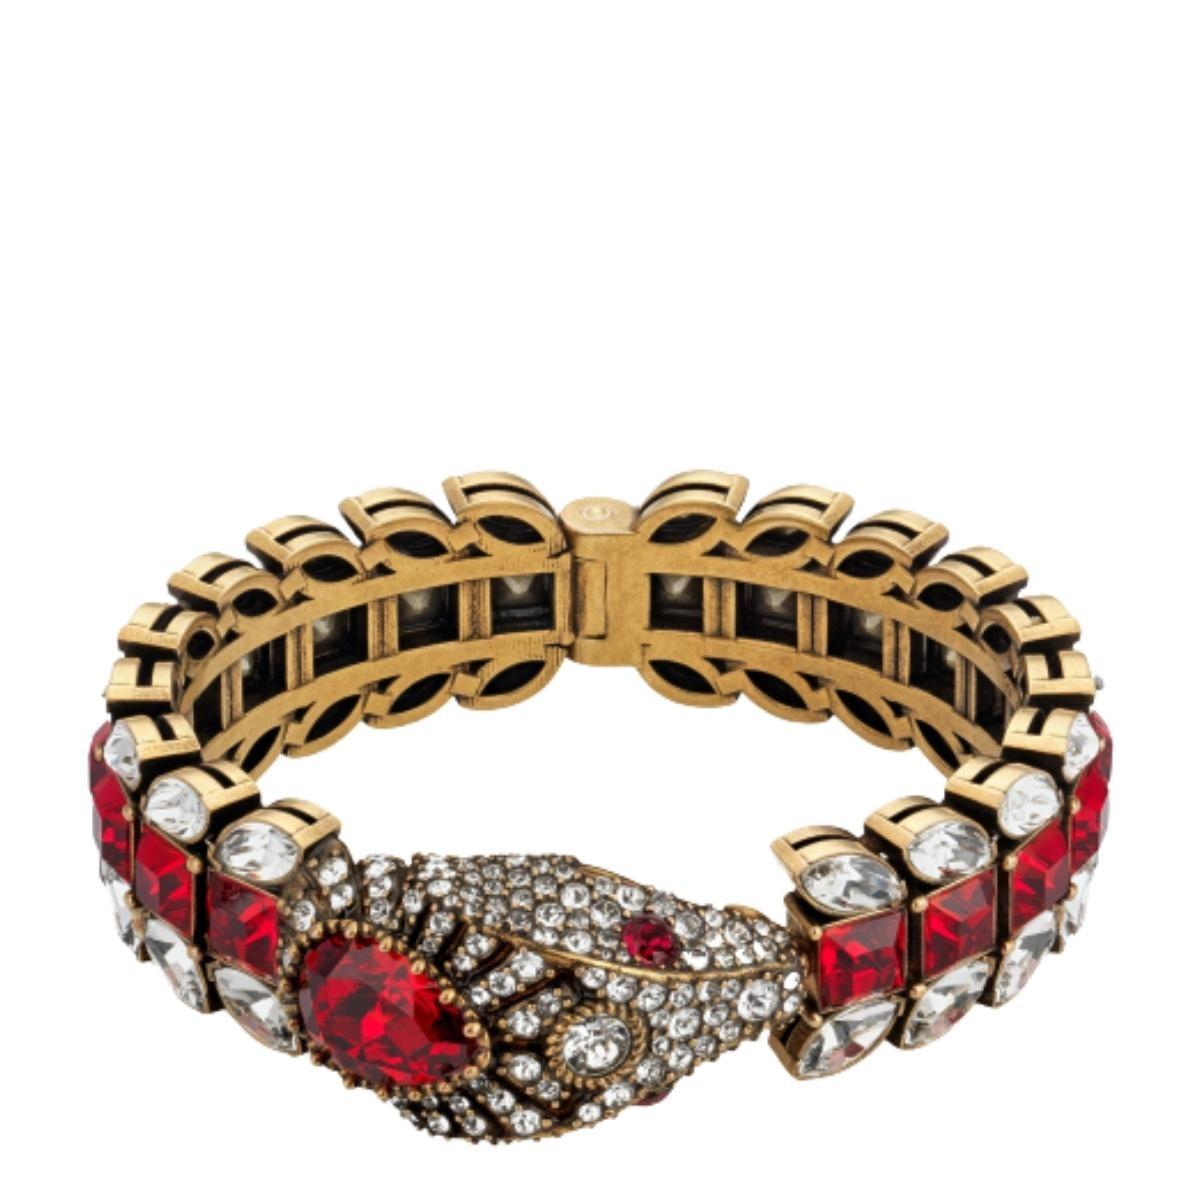 Gold-tone bracelet with a snake motif from Gucci. 
Encrusted with decorative elements in silver-tone and red.
Structured design
Gold-tone metal and crystal embellishments.
Composition: Crystal, Metal
Width: 0.8